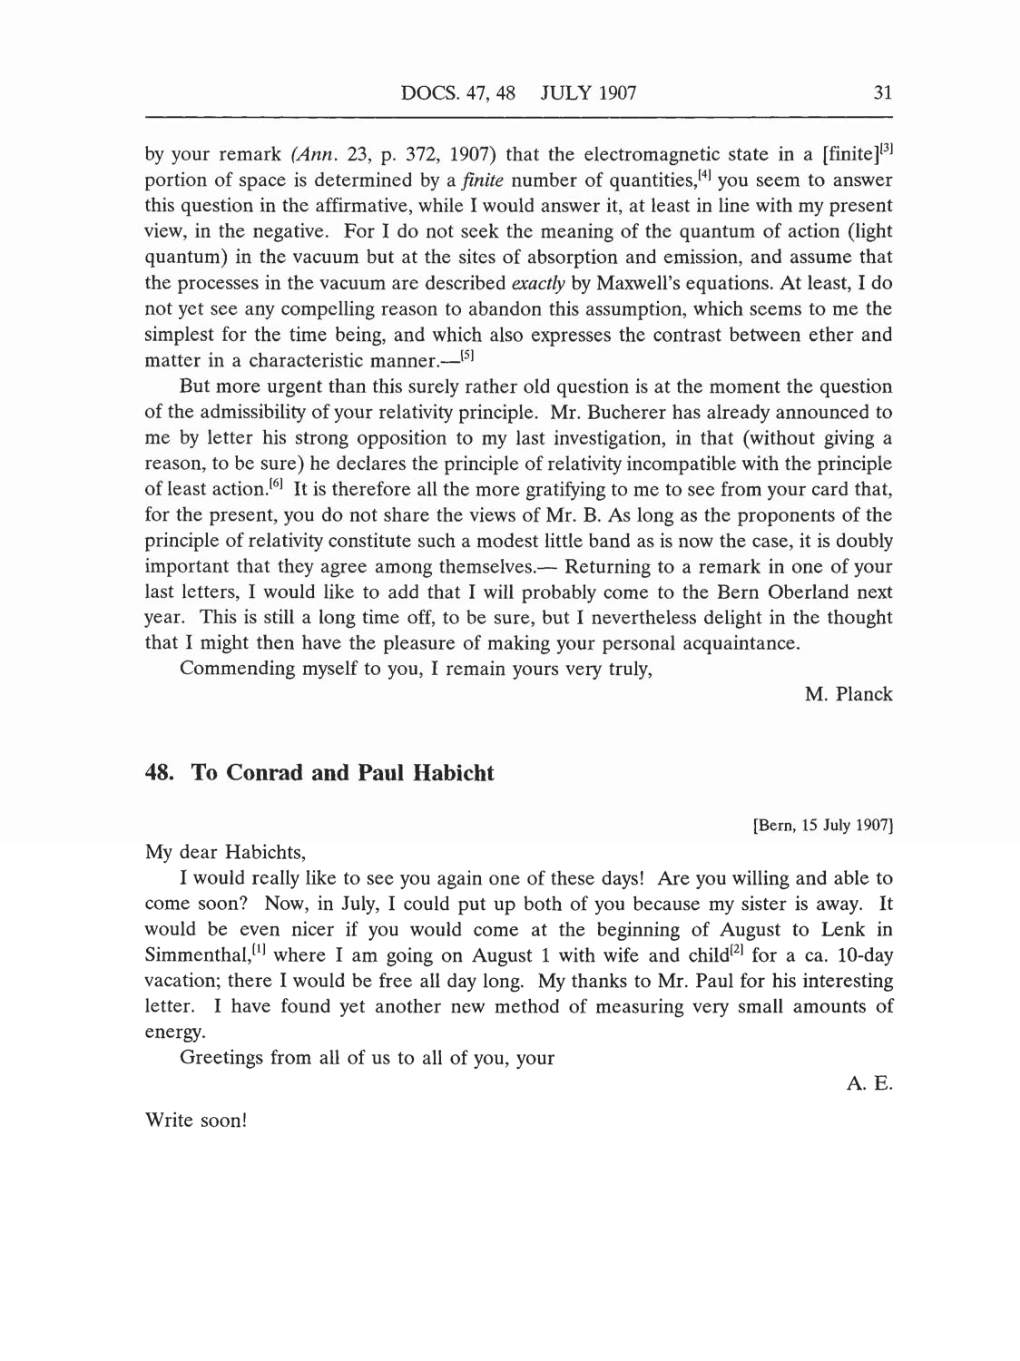 Volume 5: The Swiss Years: Correspondence, 1902-1914 (English translation supplement) page 31